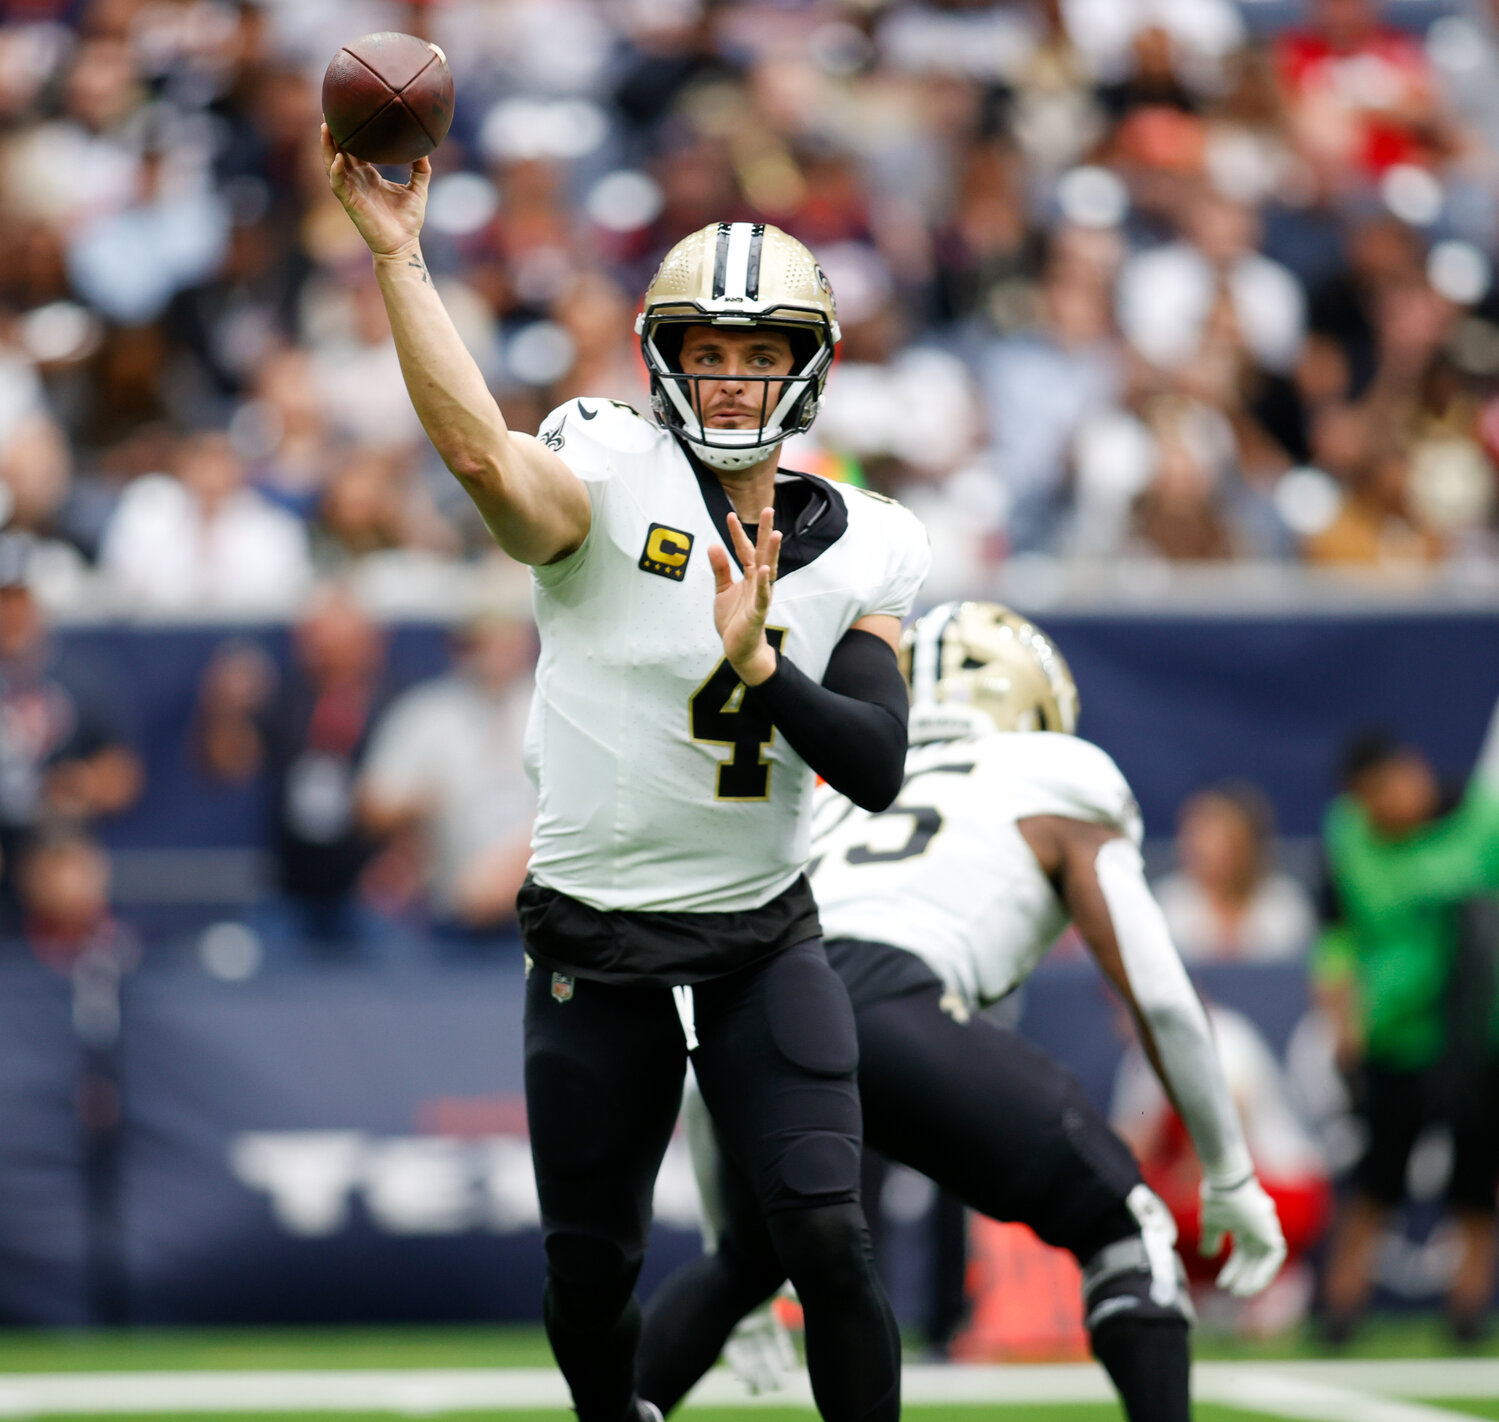 Saints quarterback Derek Carr (4) passes the ball during an NFL game between the Texans and the Saints on October 15, 2023 in Houston. The Texans won, 20-13.